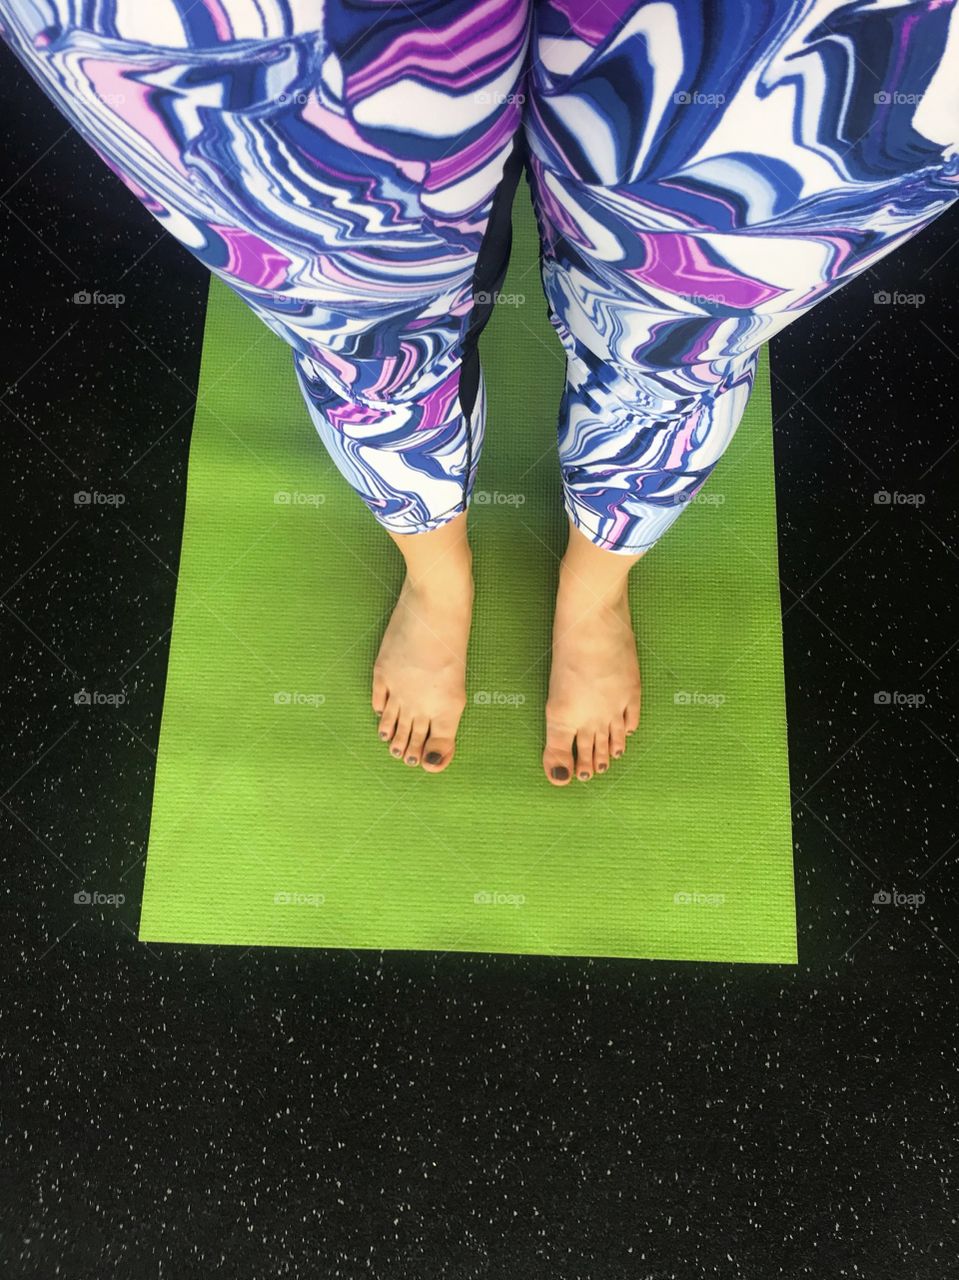 You can’t workout without a bright mat and crazy leggings, right? 